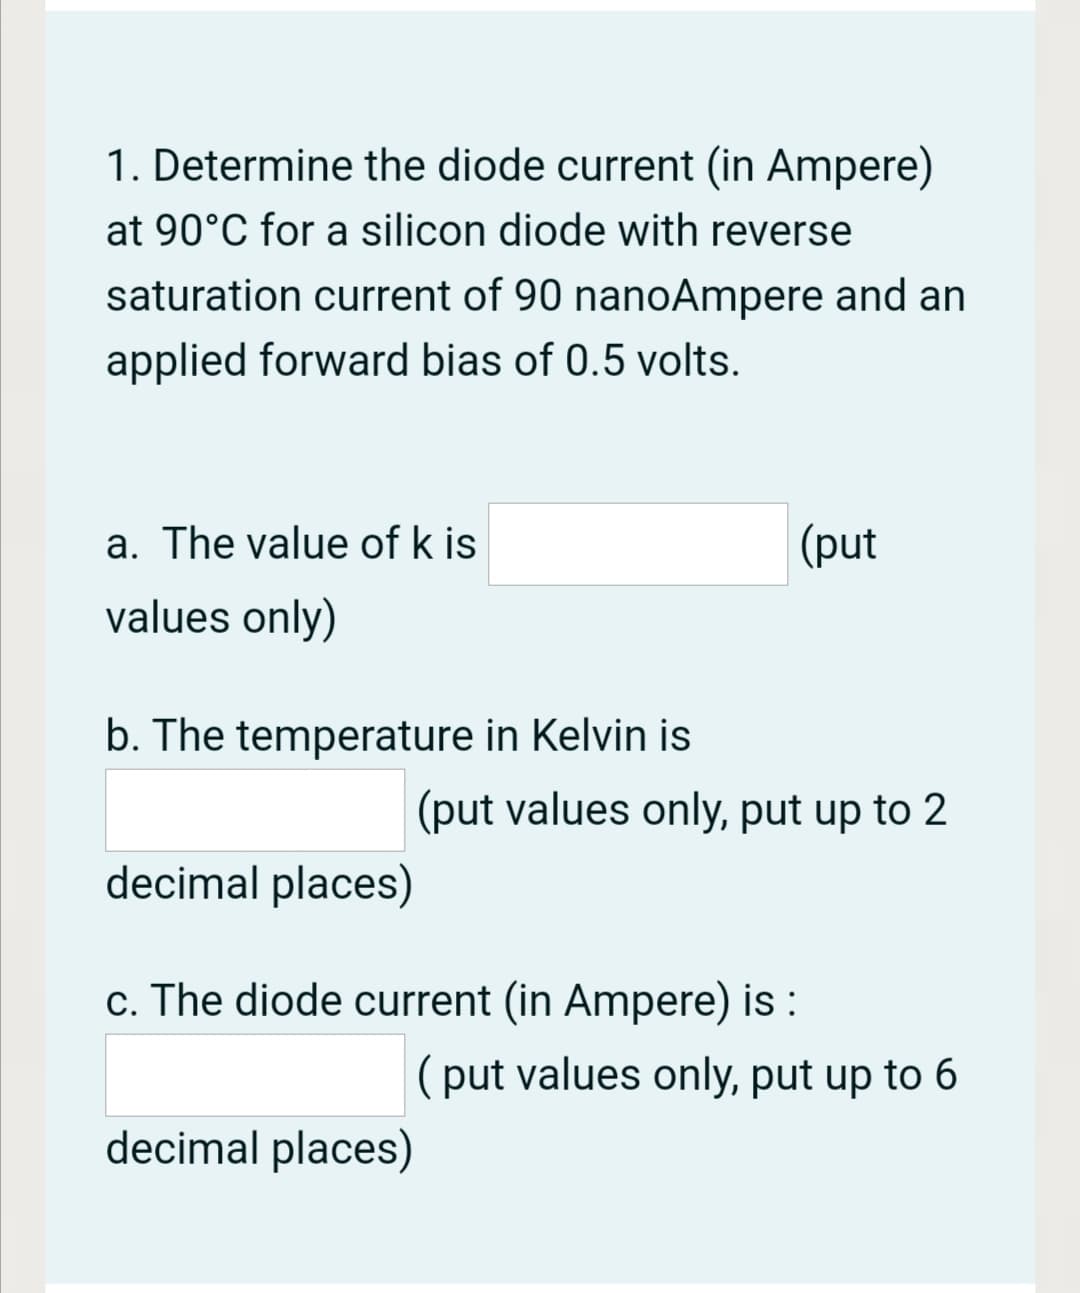 1. Determine the diode current (in Ampere)
at 90°C for a silicon diode with reverse
saturation current of 90 nanoAmpere and an
applied forward bias of 0.5 volts.
a. The value of k is
(put
values only)
b. The temperature in Kelvin is
(put values only, put up to 2
decimal places)
c. The diode current (in Ampere) is :
(put values only, put up to 6
decimal places)
